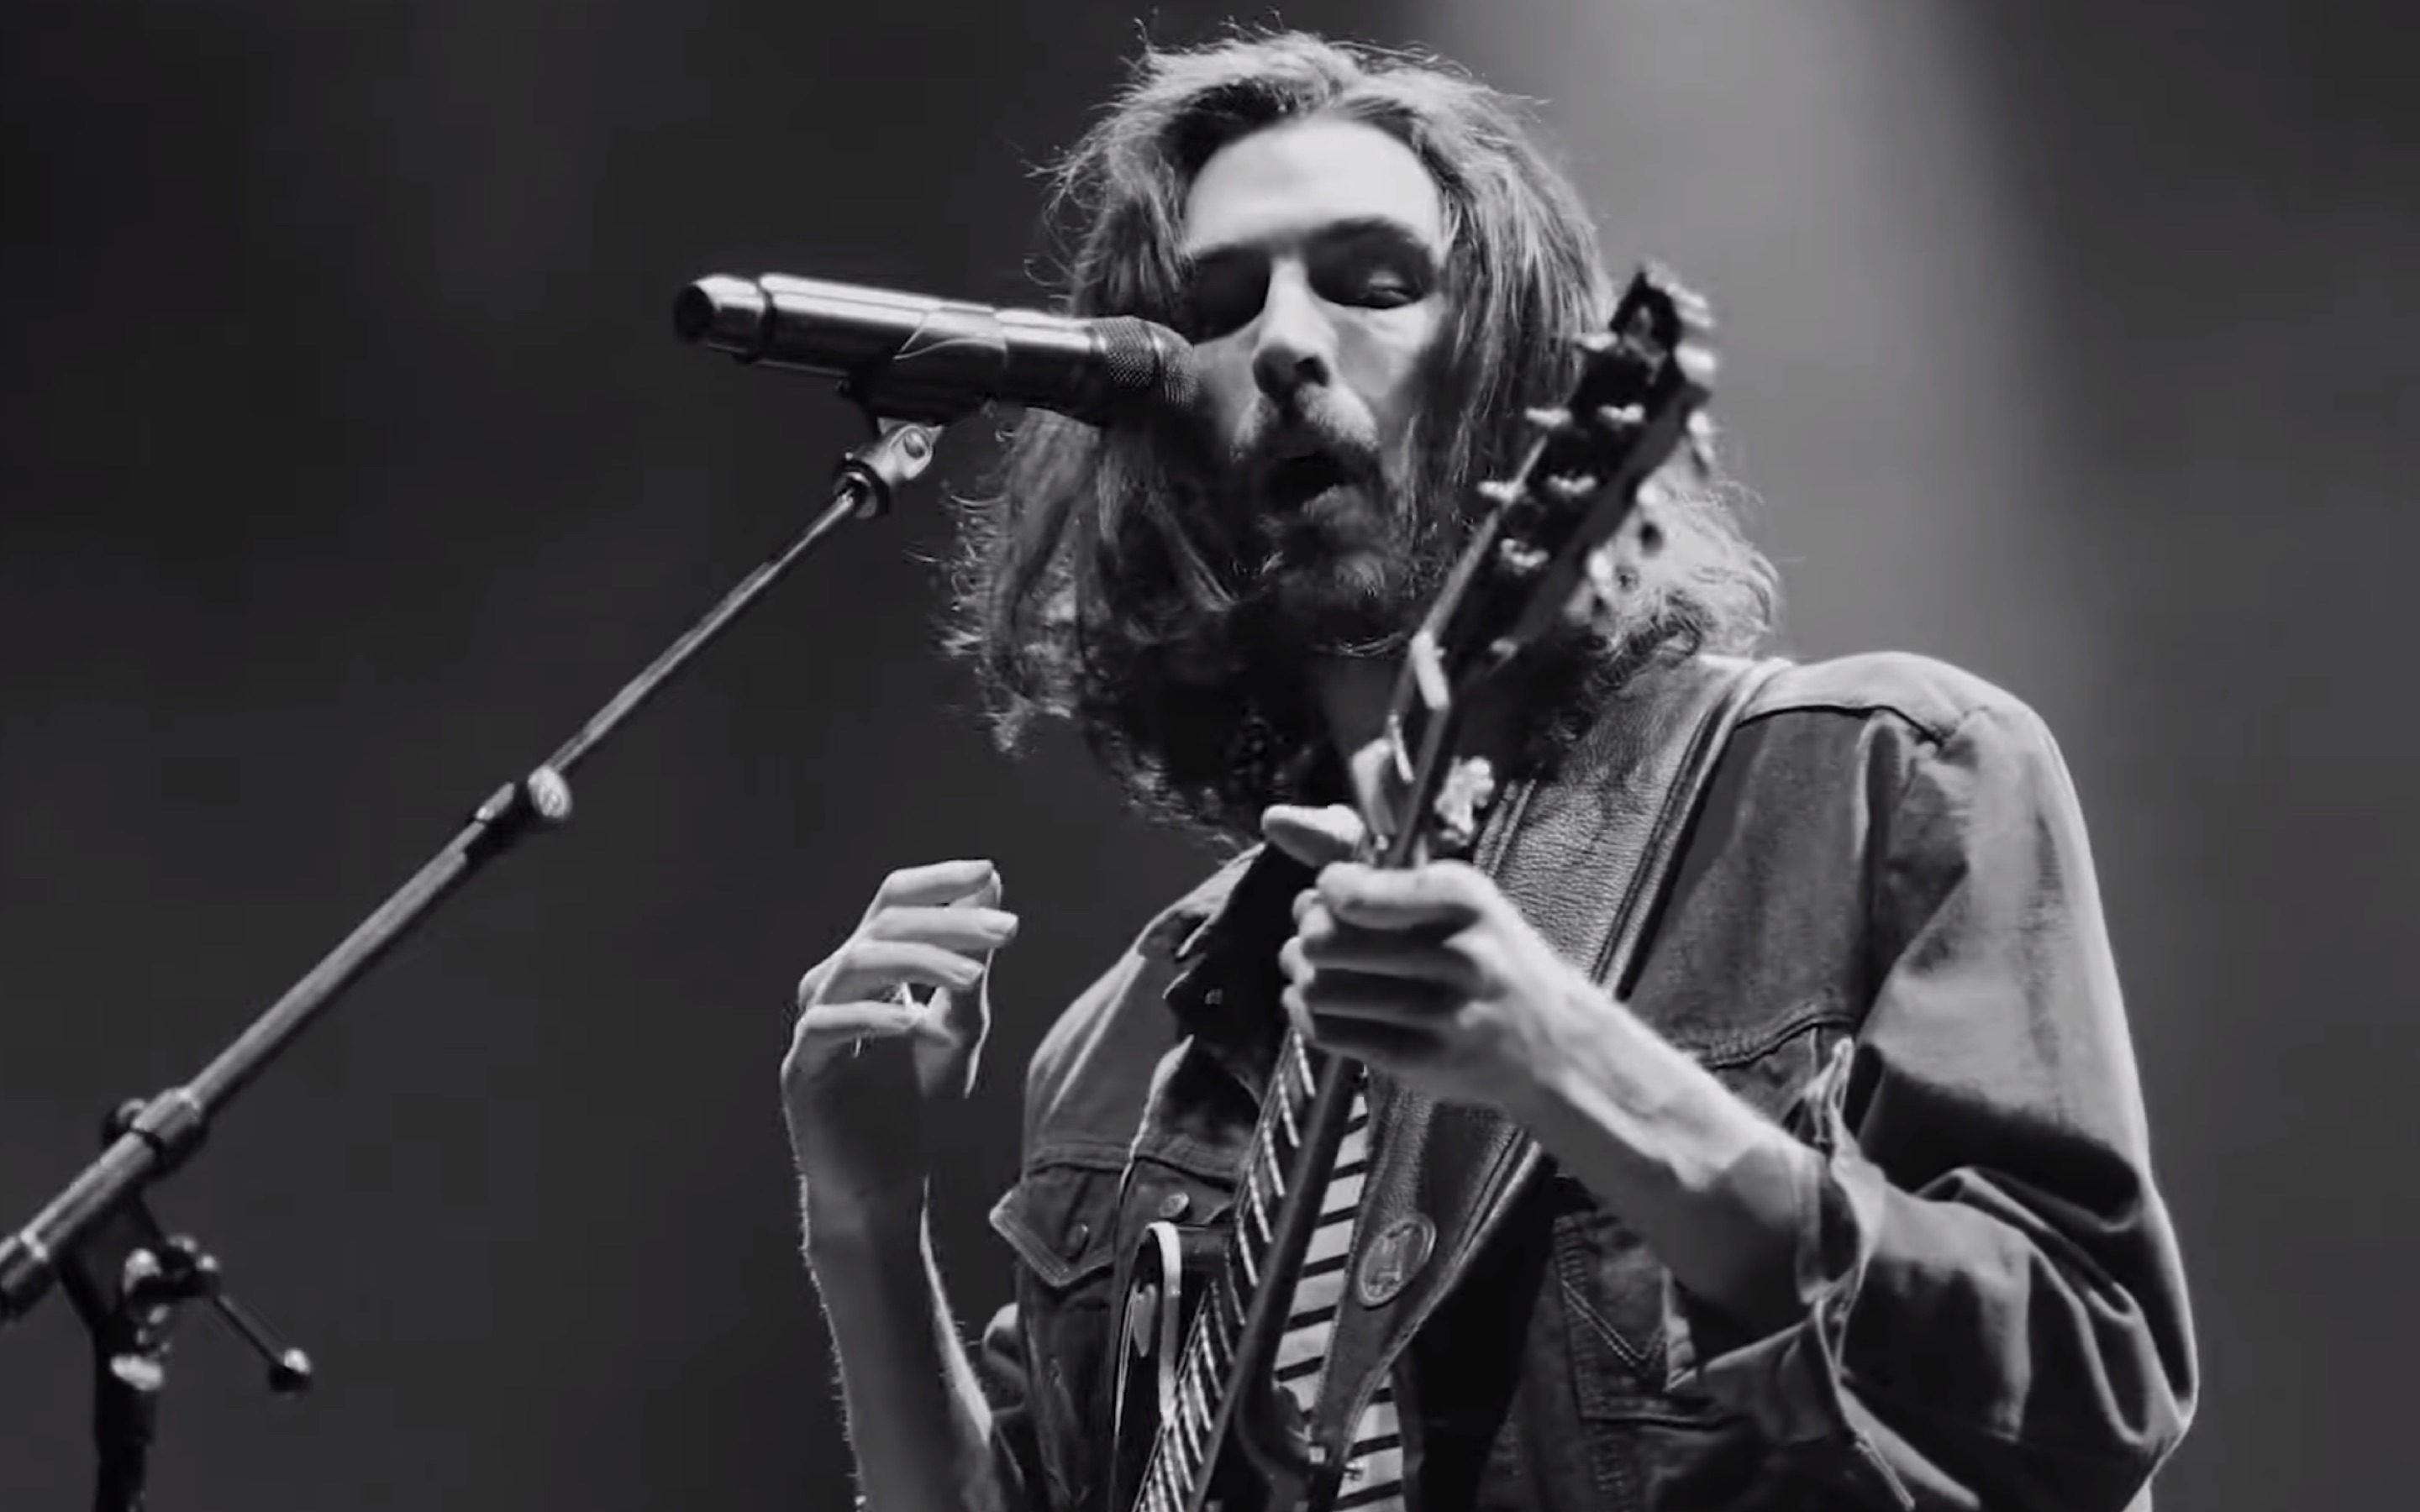 Singer-songwriter Hozier performing his latest song <i></noscript>Jackboot Jump</i> which features a verse about the Hong Kong protests. Screengrab via YouTube.